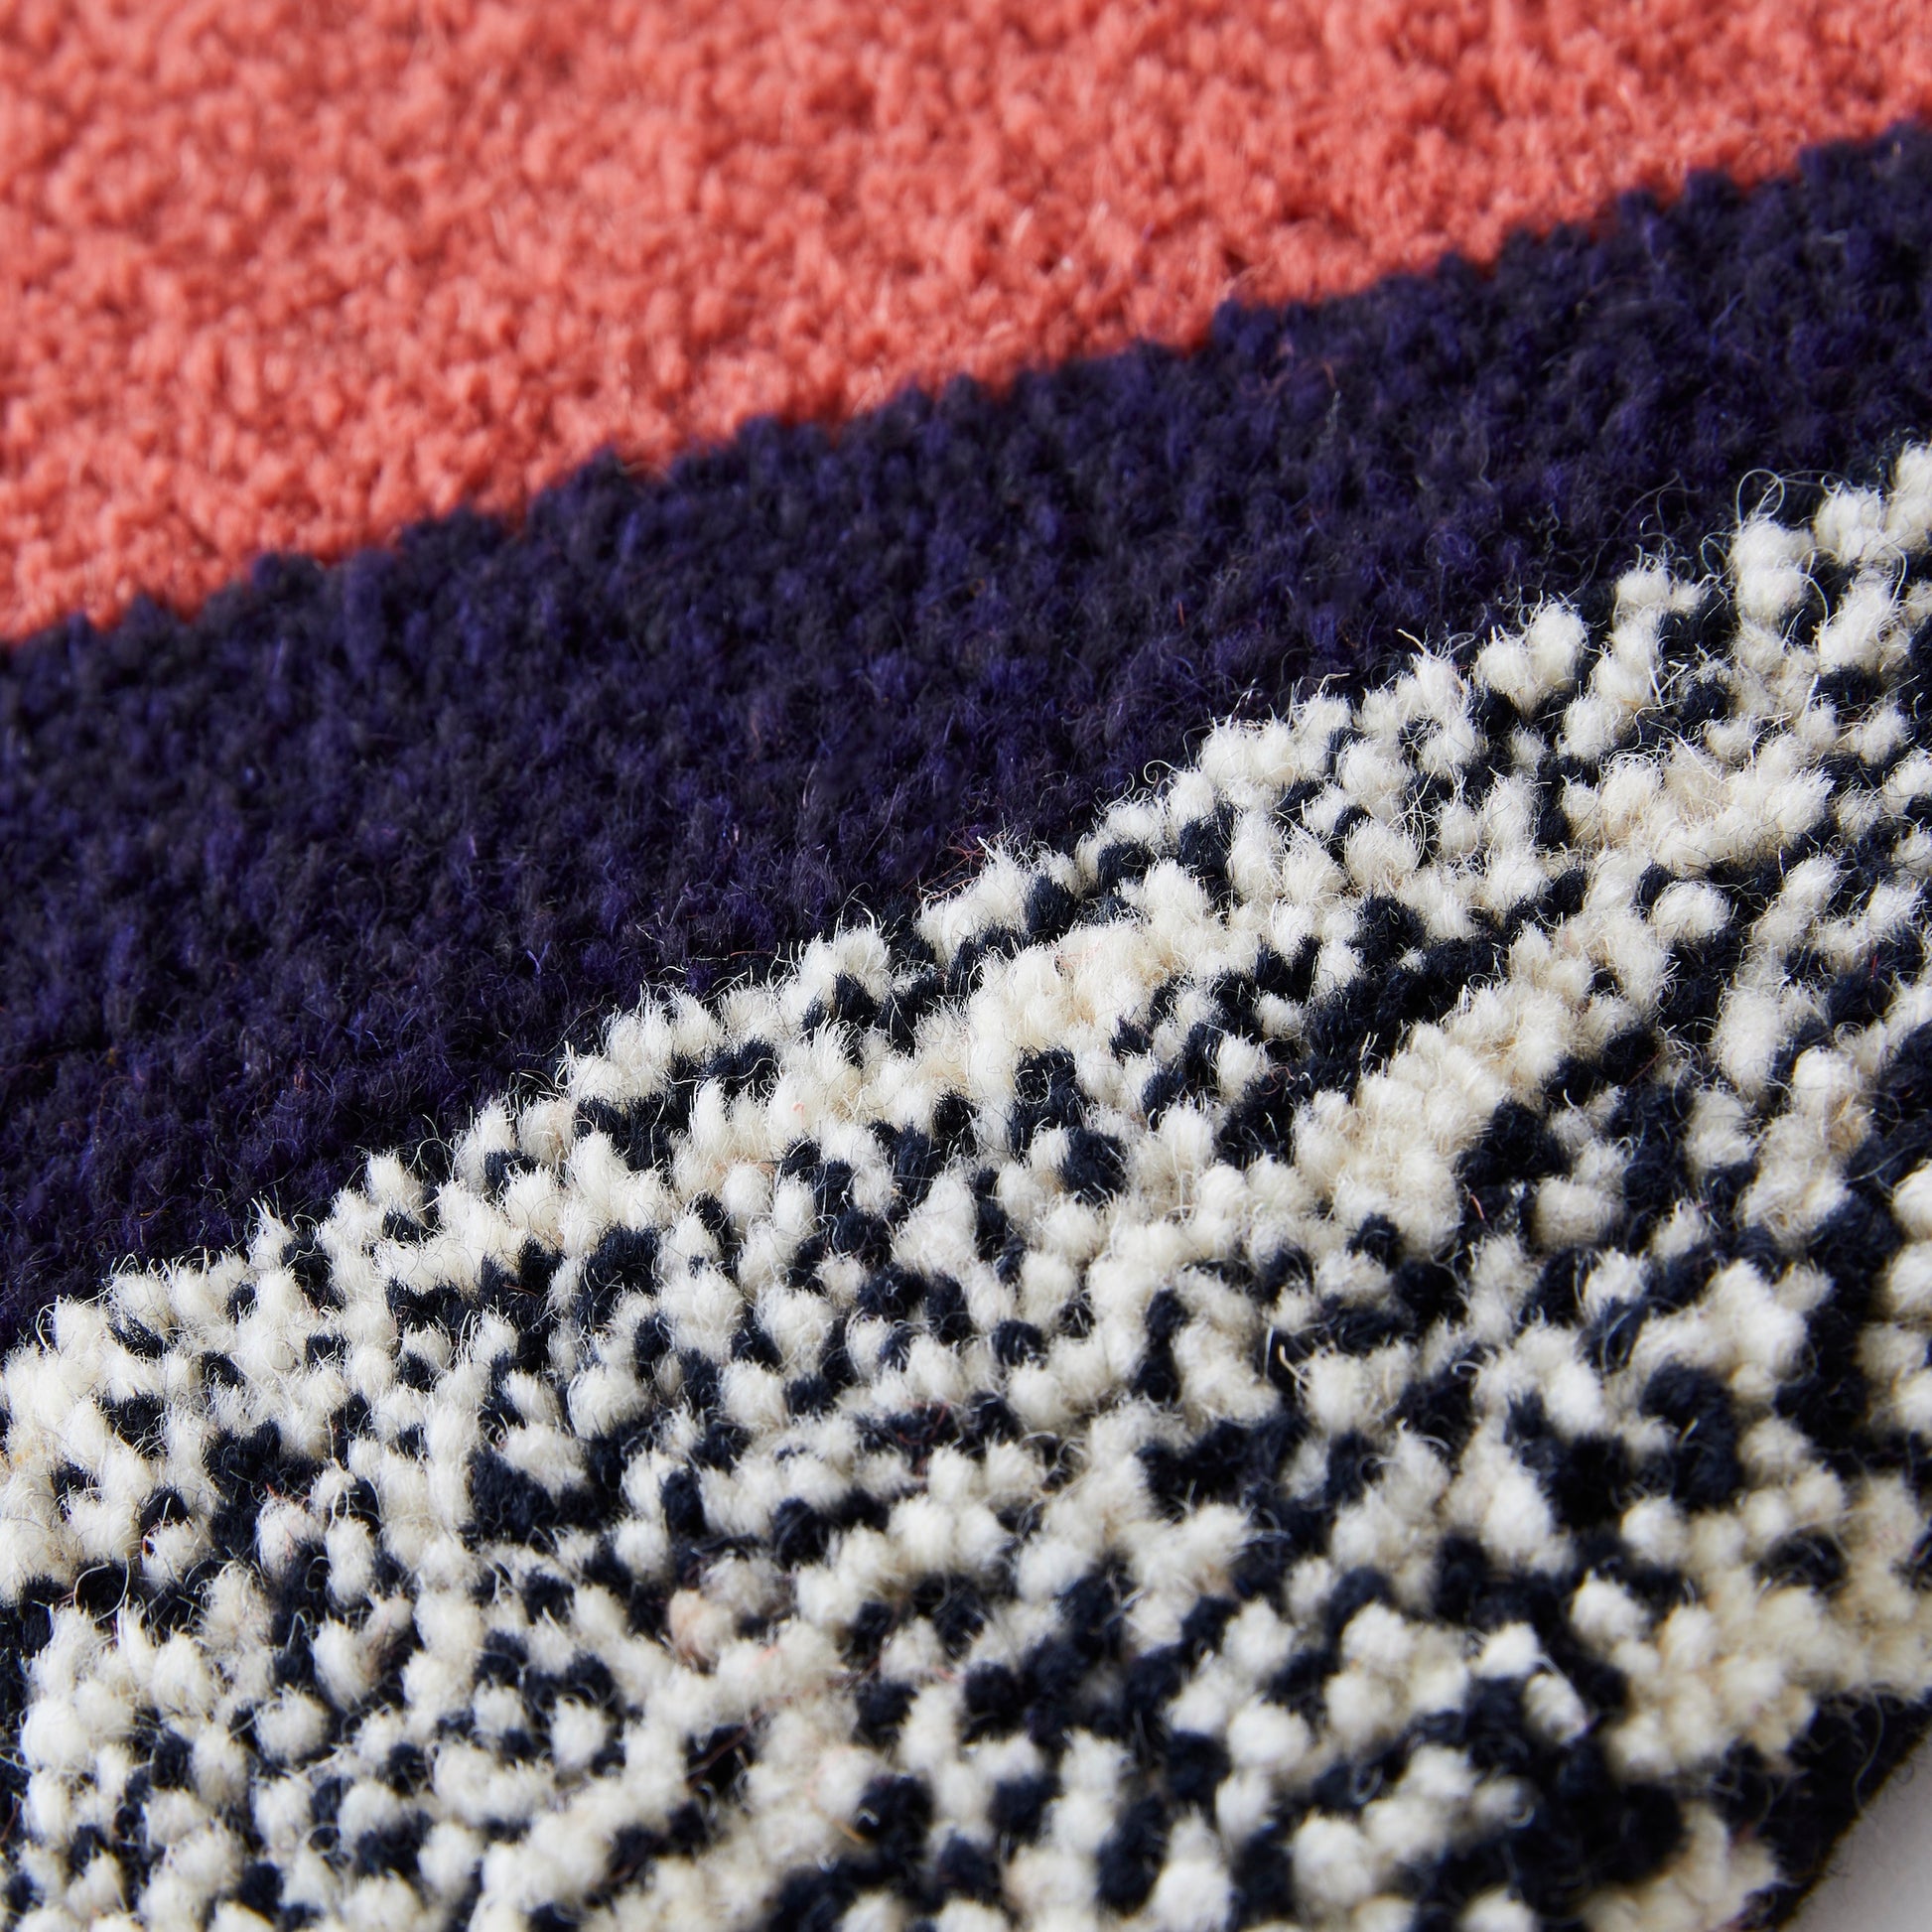 Handmade rug runner created using reclaimed yarns. Using Triangular fragments in Coral, Purple, Black and White flecks, Navy and Yellow with a hand bound dusky coral/pink edge close up.